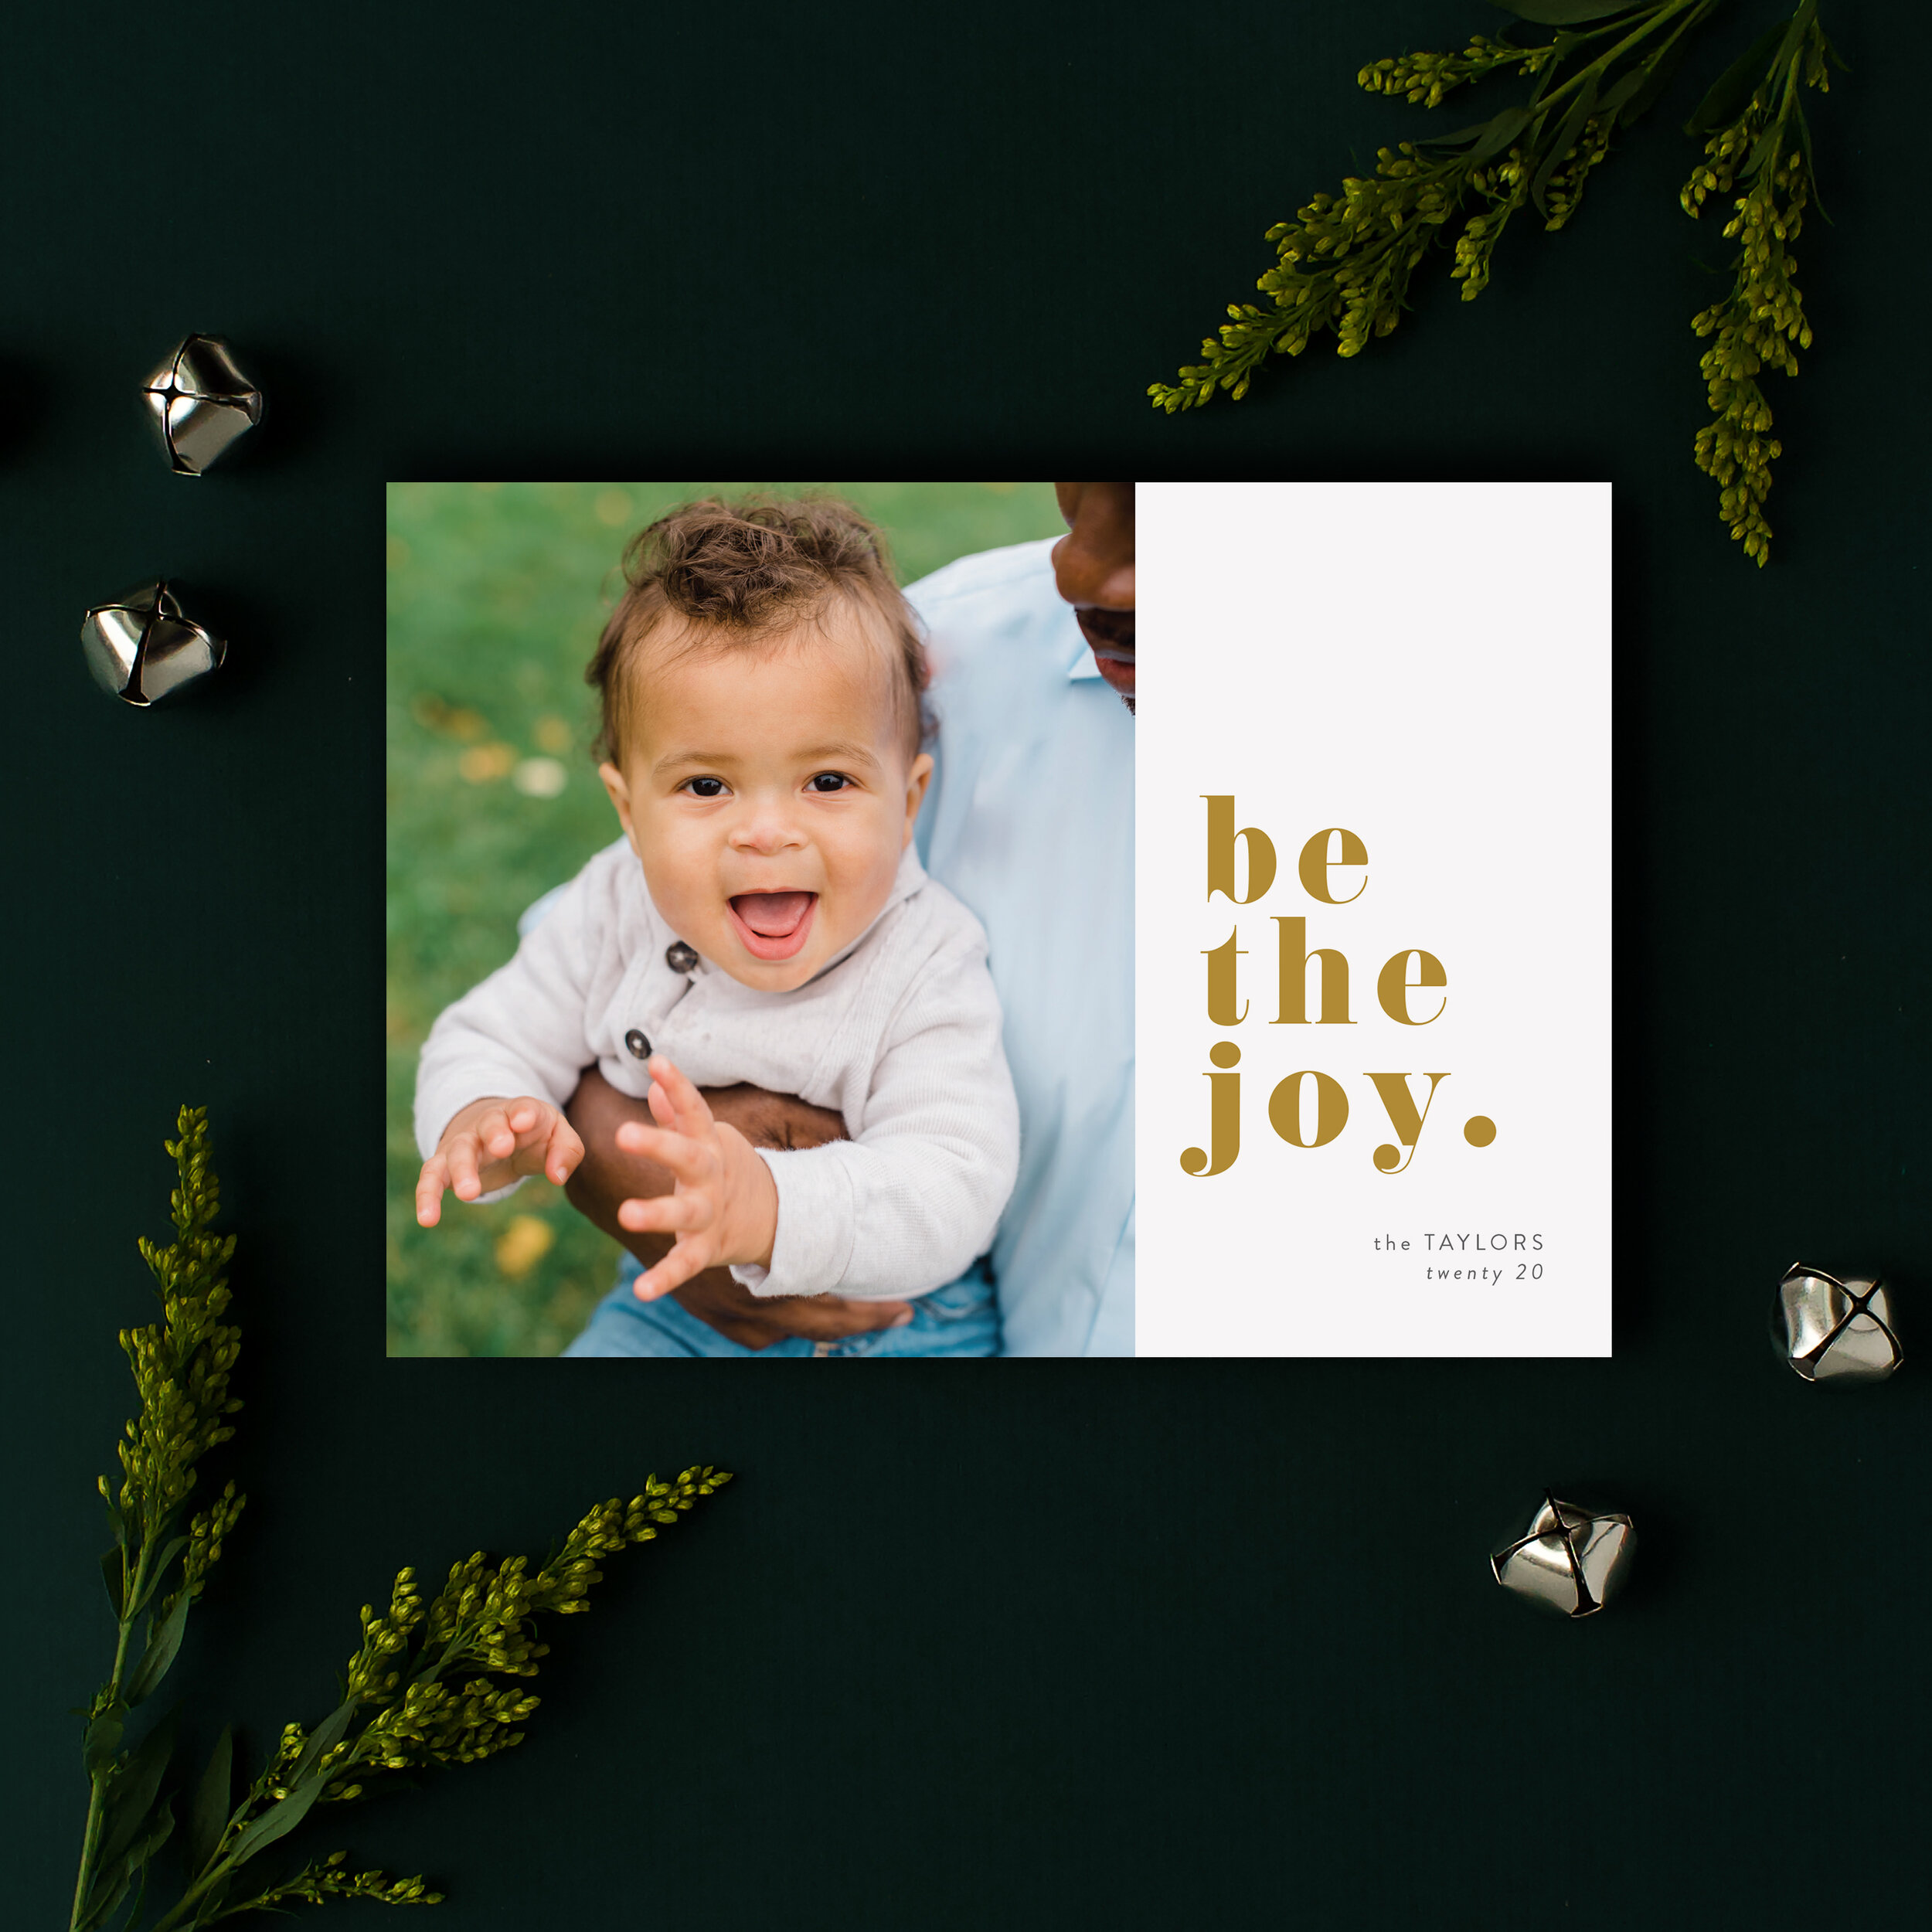 Jula Paper Co | 2020 Holiday Card Collection | www.julapaper.co